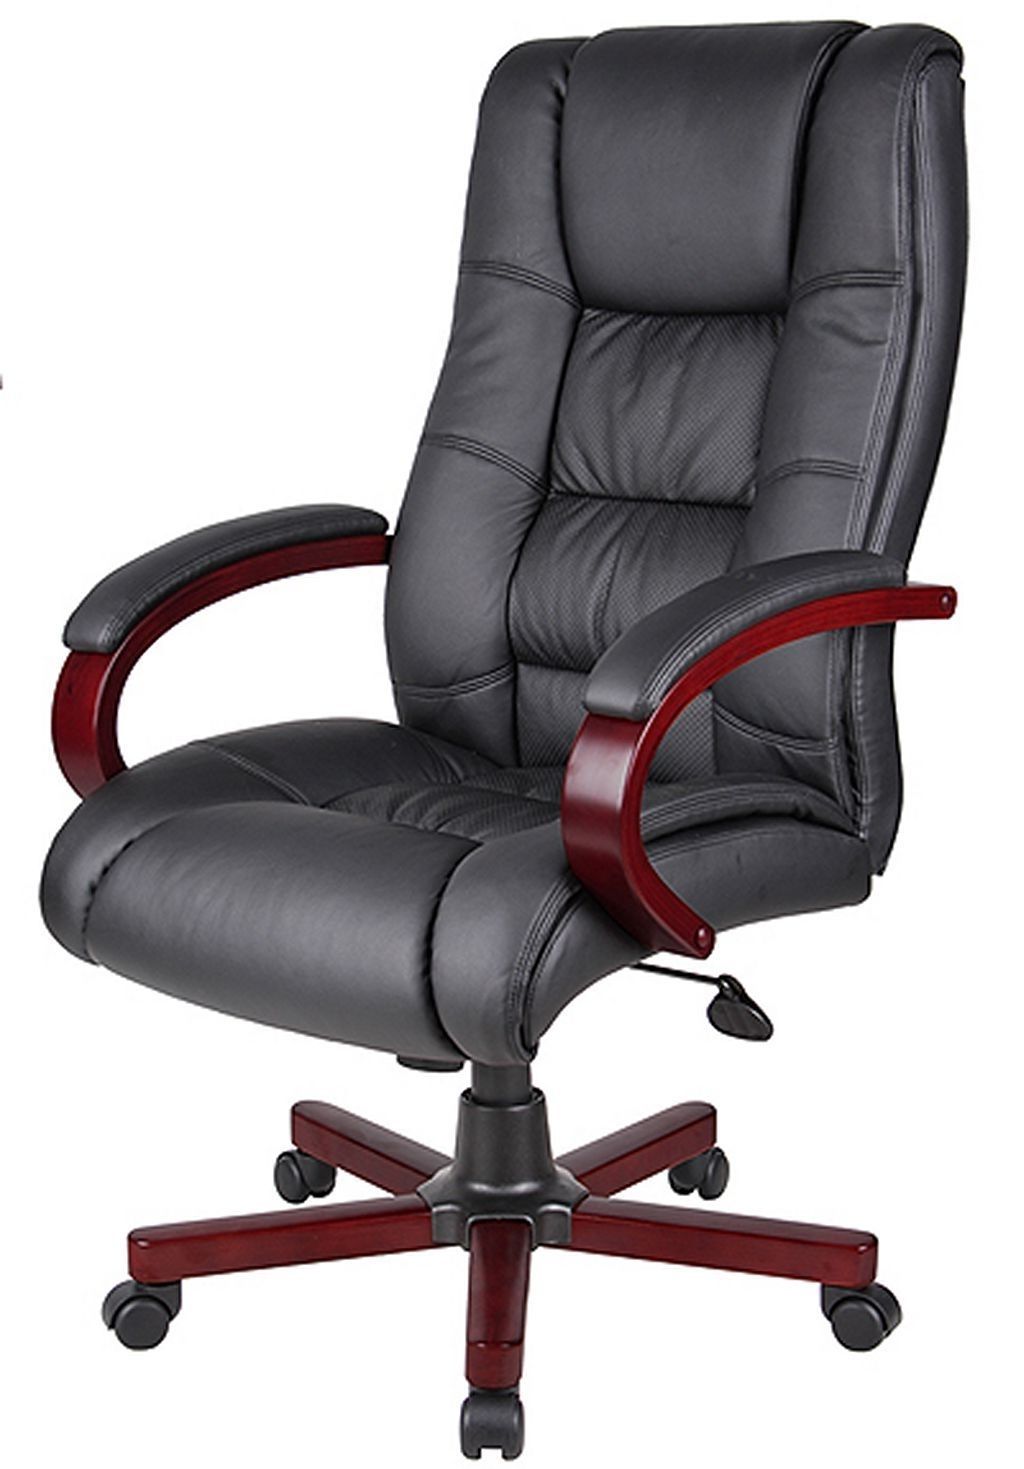 Black Executive Office Chairs With High Back Within Most Up To Date Office Chair Design Elegant Black Design – Home Design Inspiration (View 12 of 20)